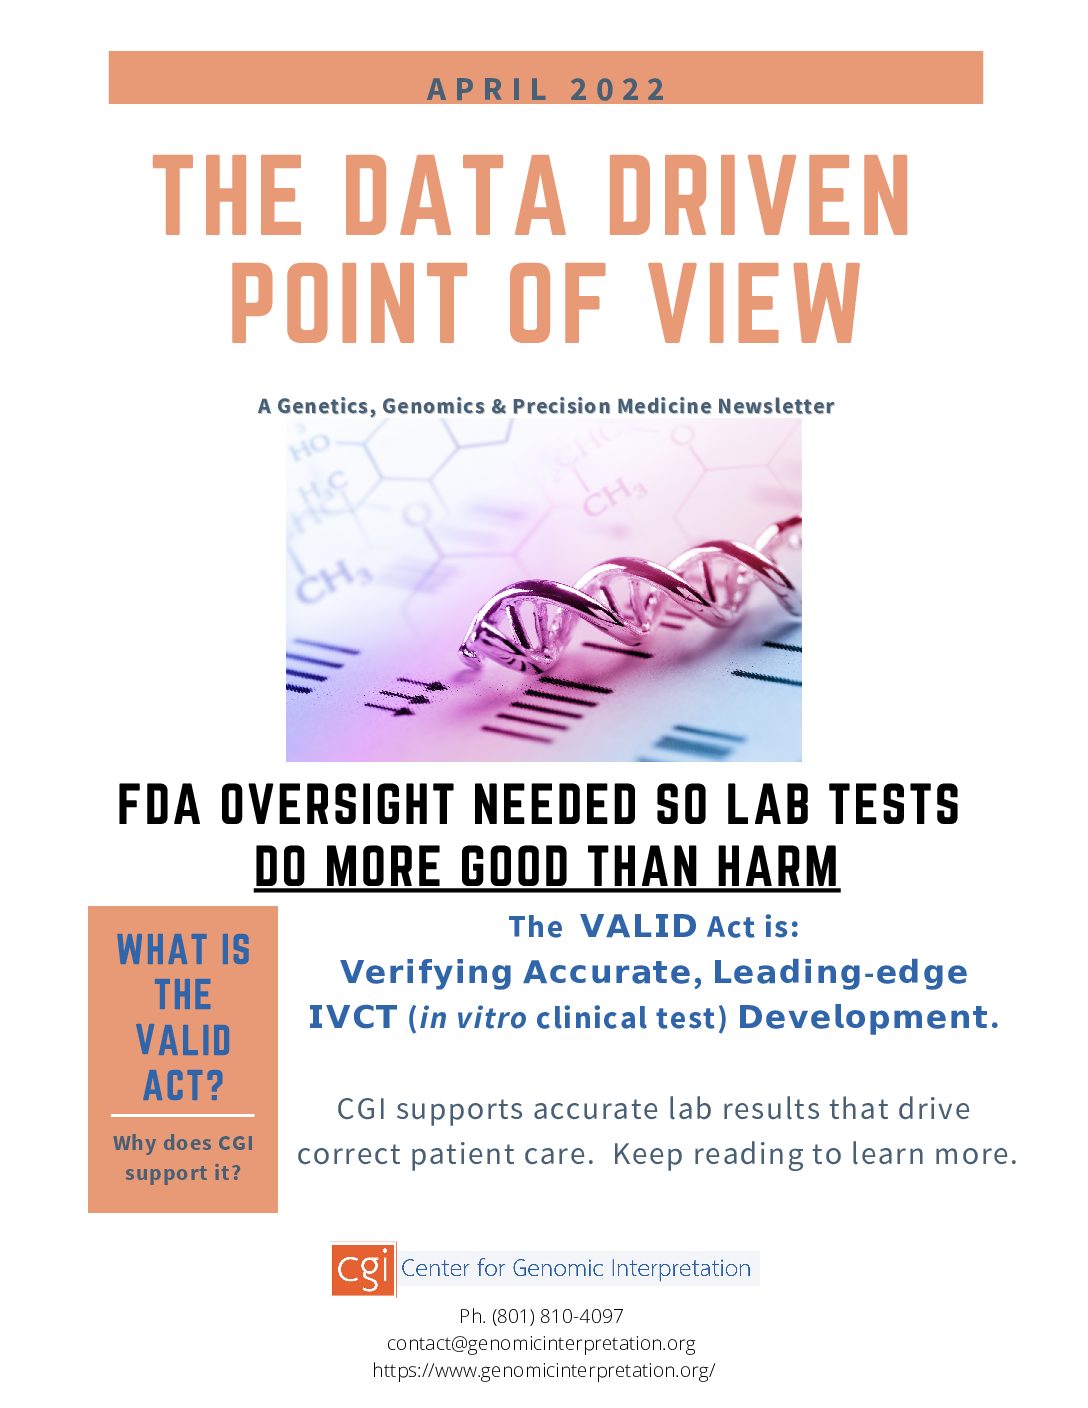 April 2022 – The Data Driven Point of View Newsletter.  FDA Oversight Needed So Lab Tests Do More GOOD than HARM